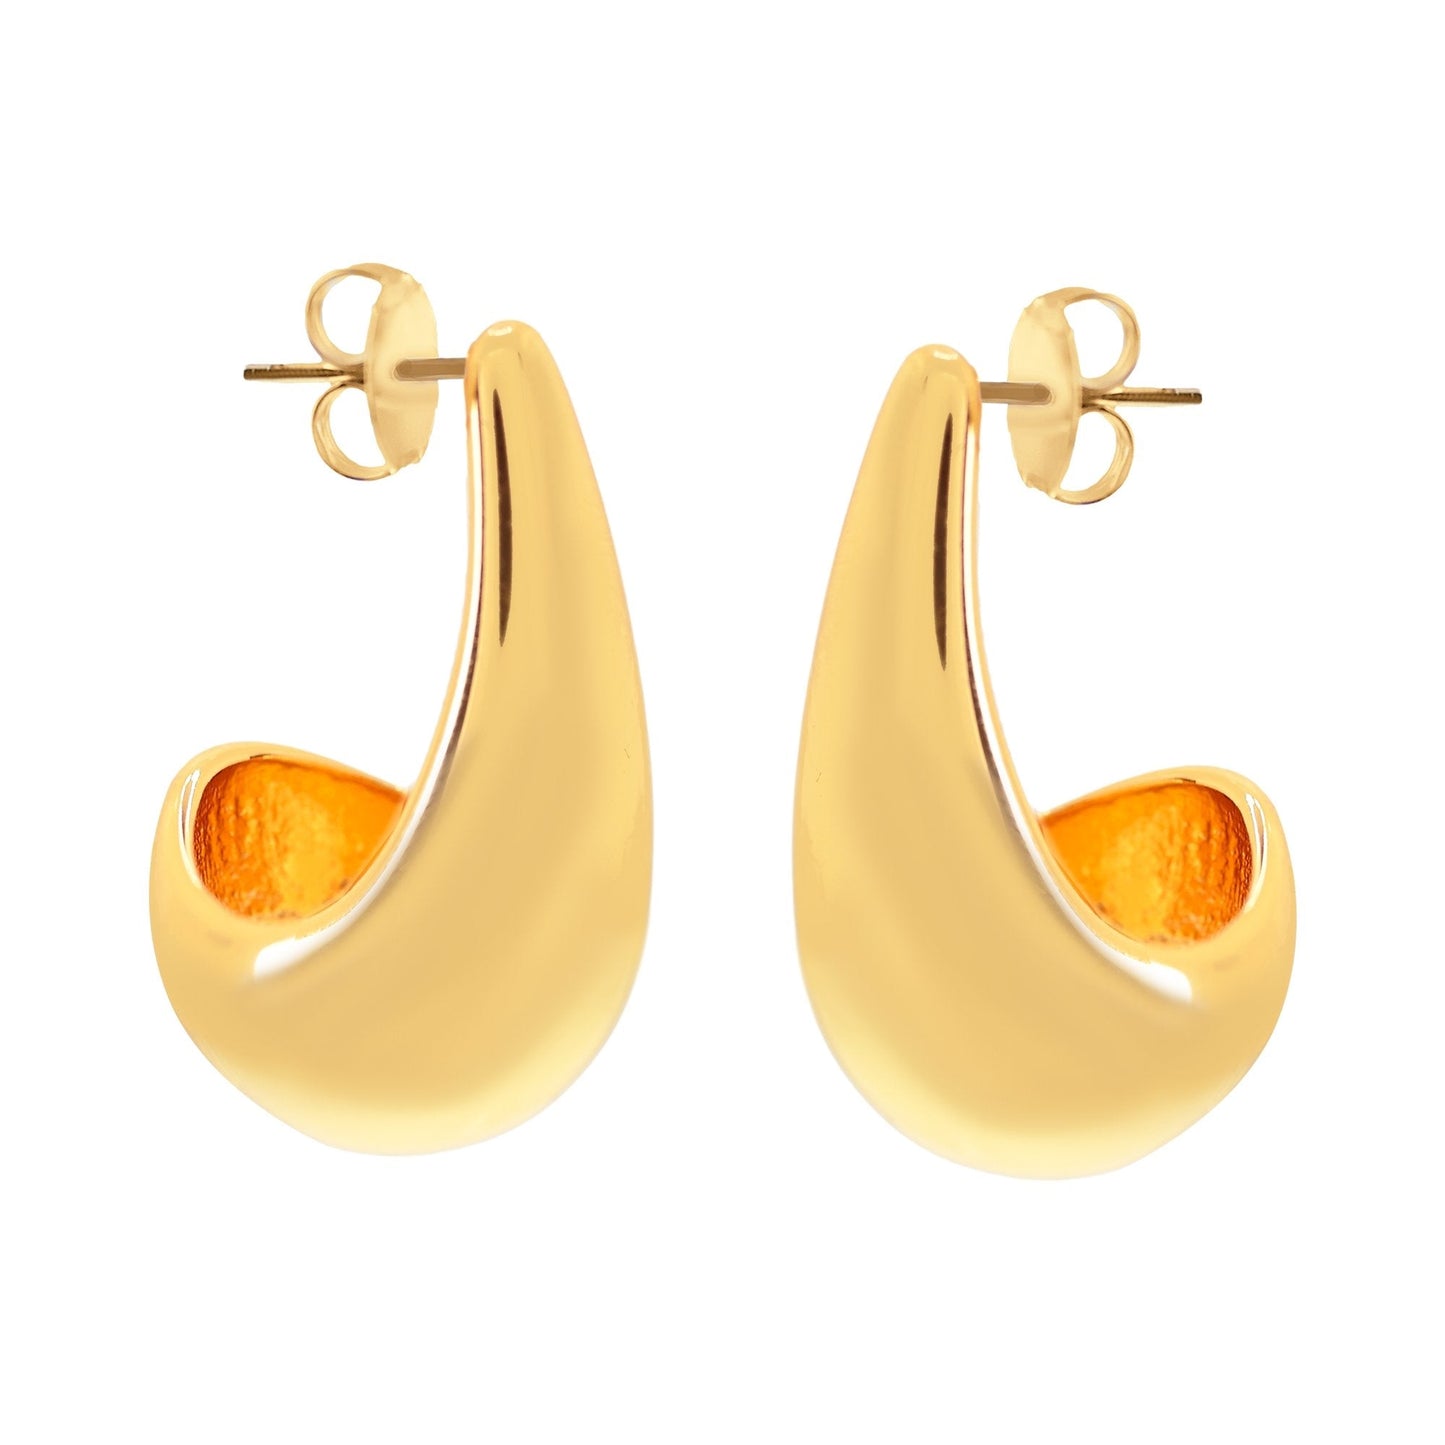 Pensive Gold Earring - Large